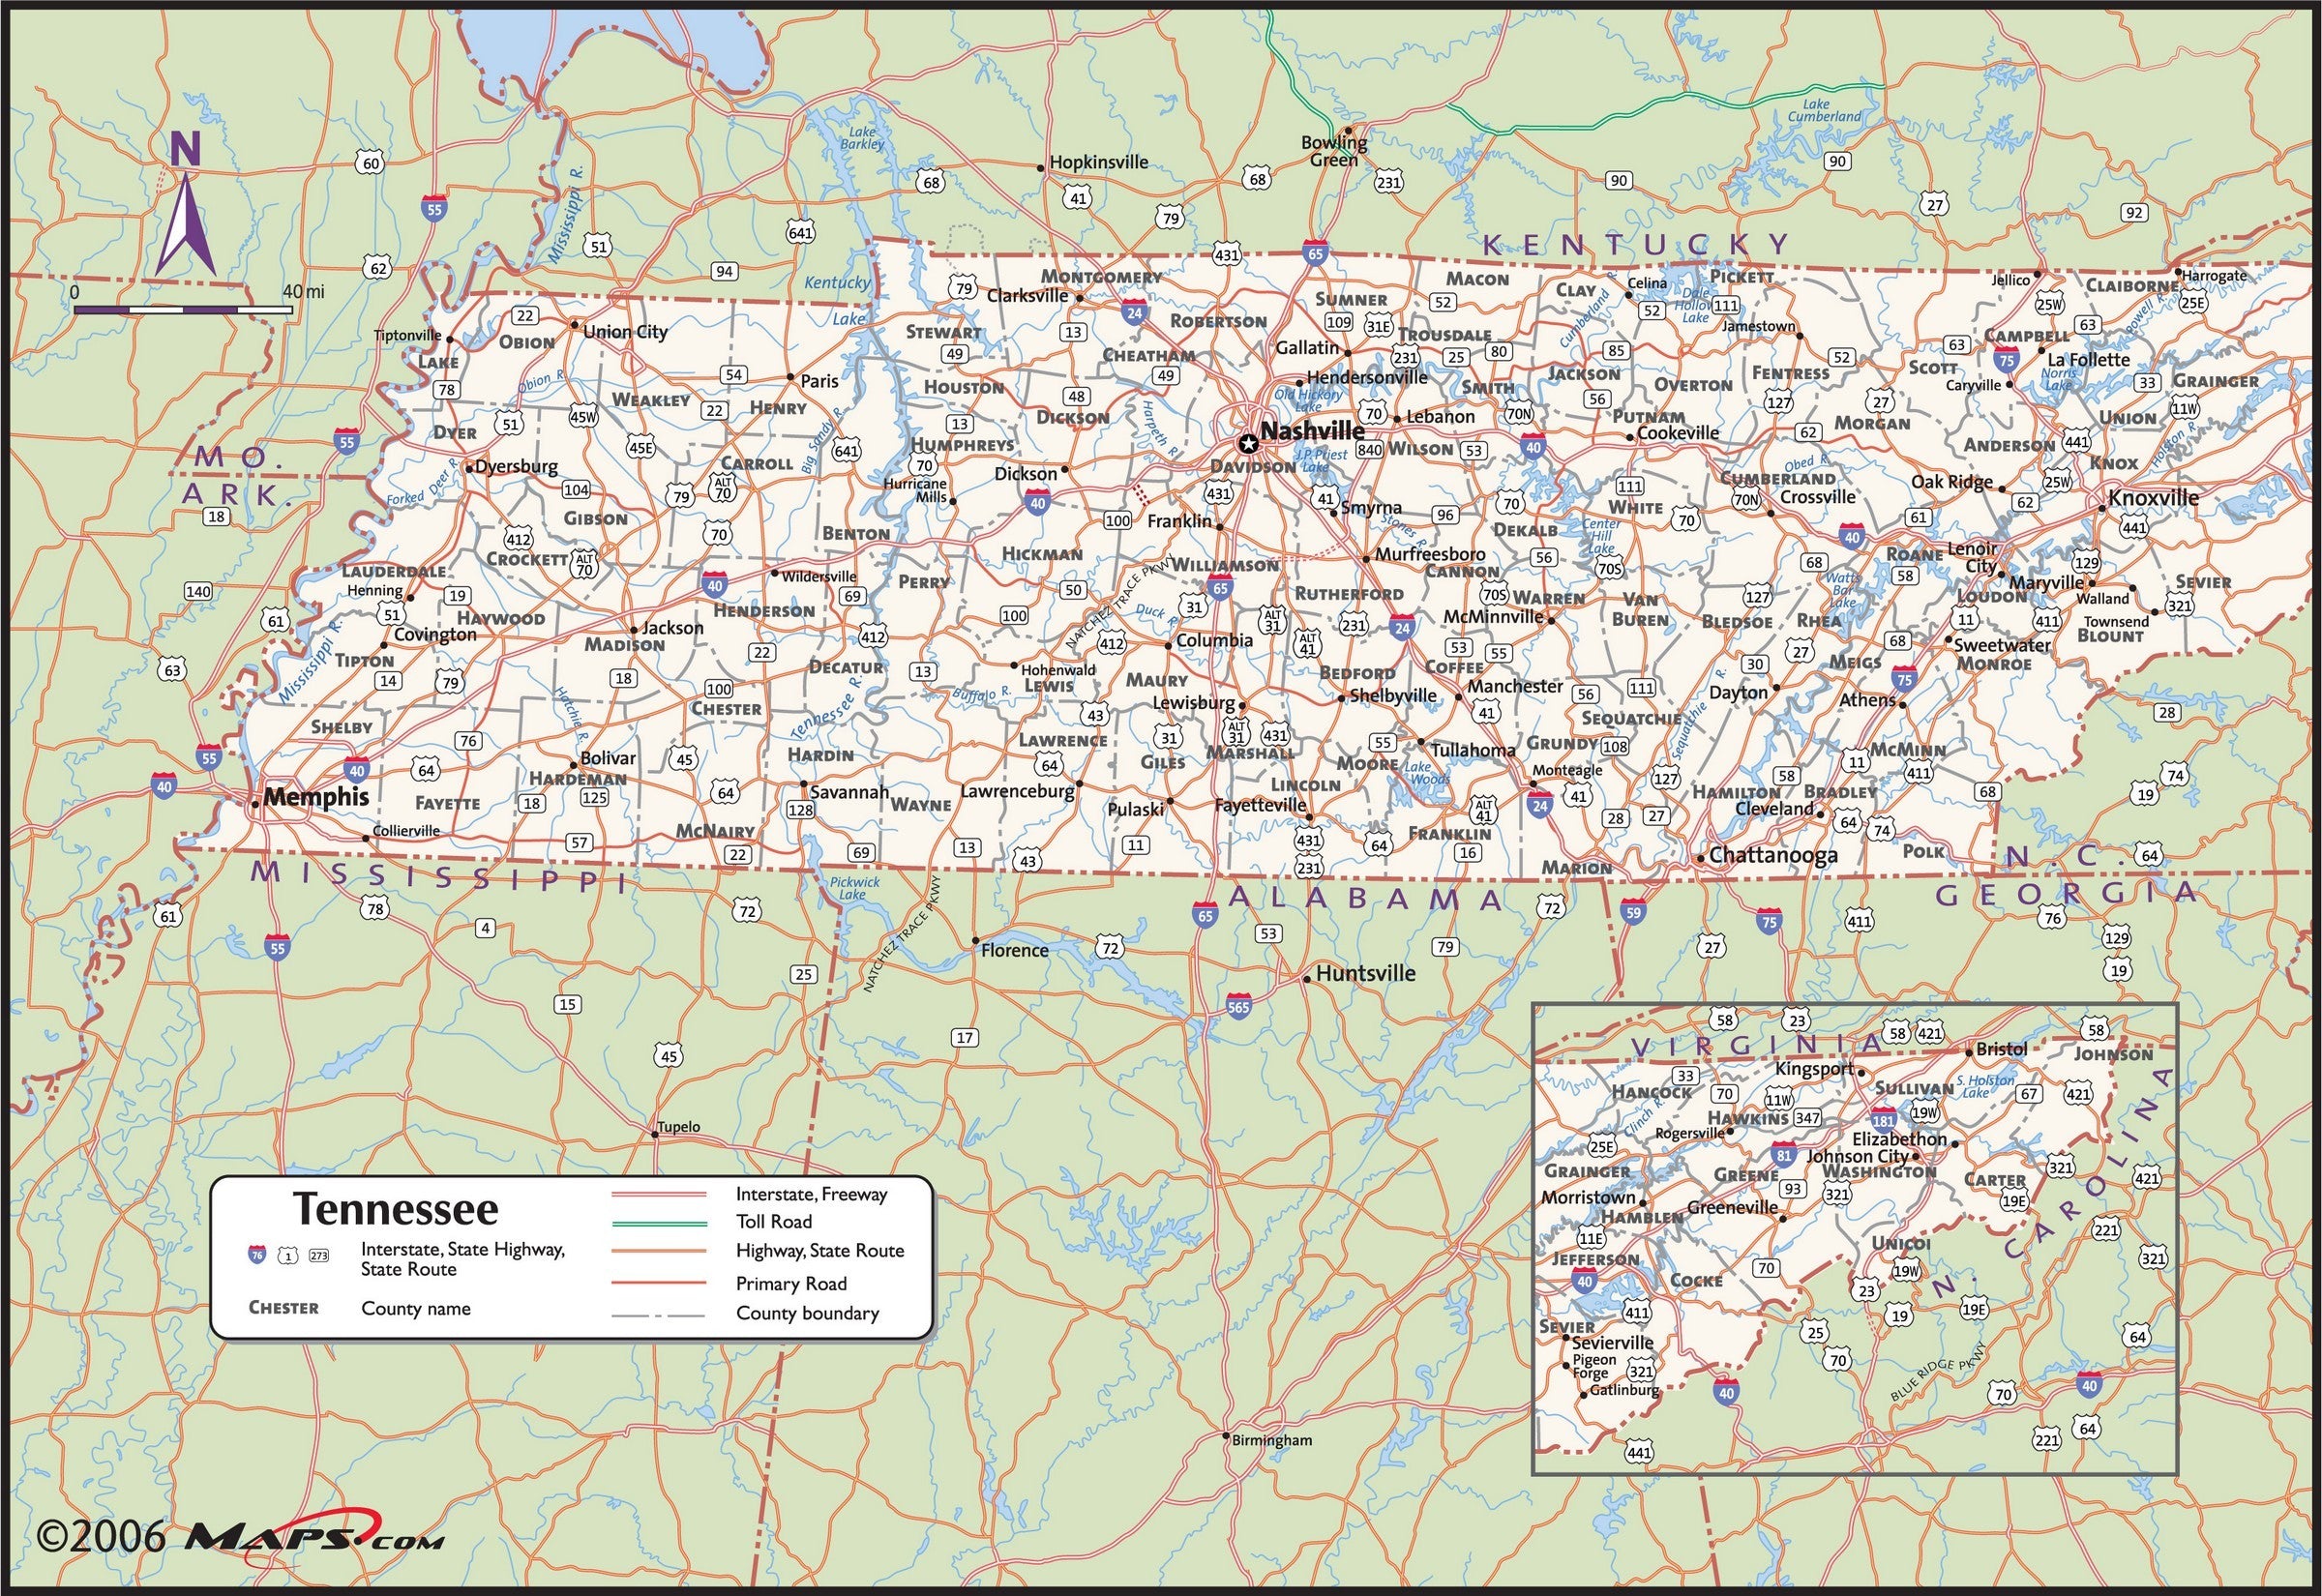 Tennessee Counties Map Extra Large 60 X Laminated | mail.napmexico.com.mx